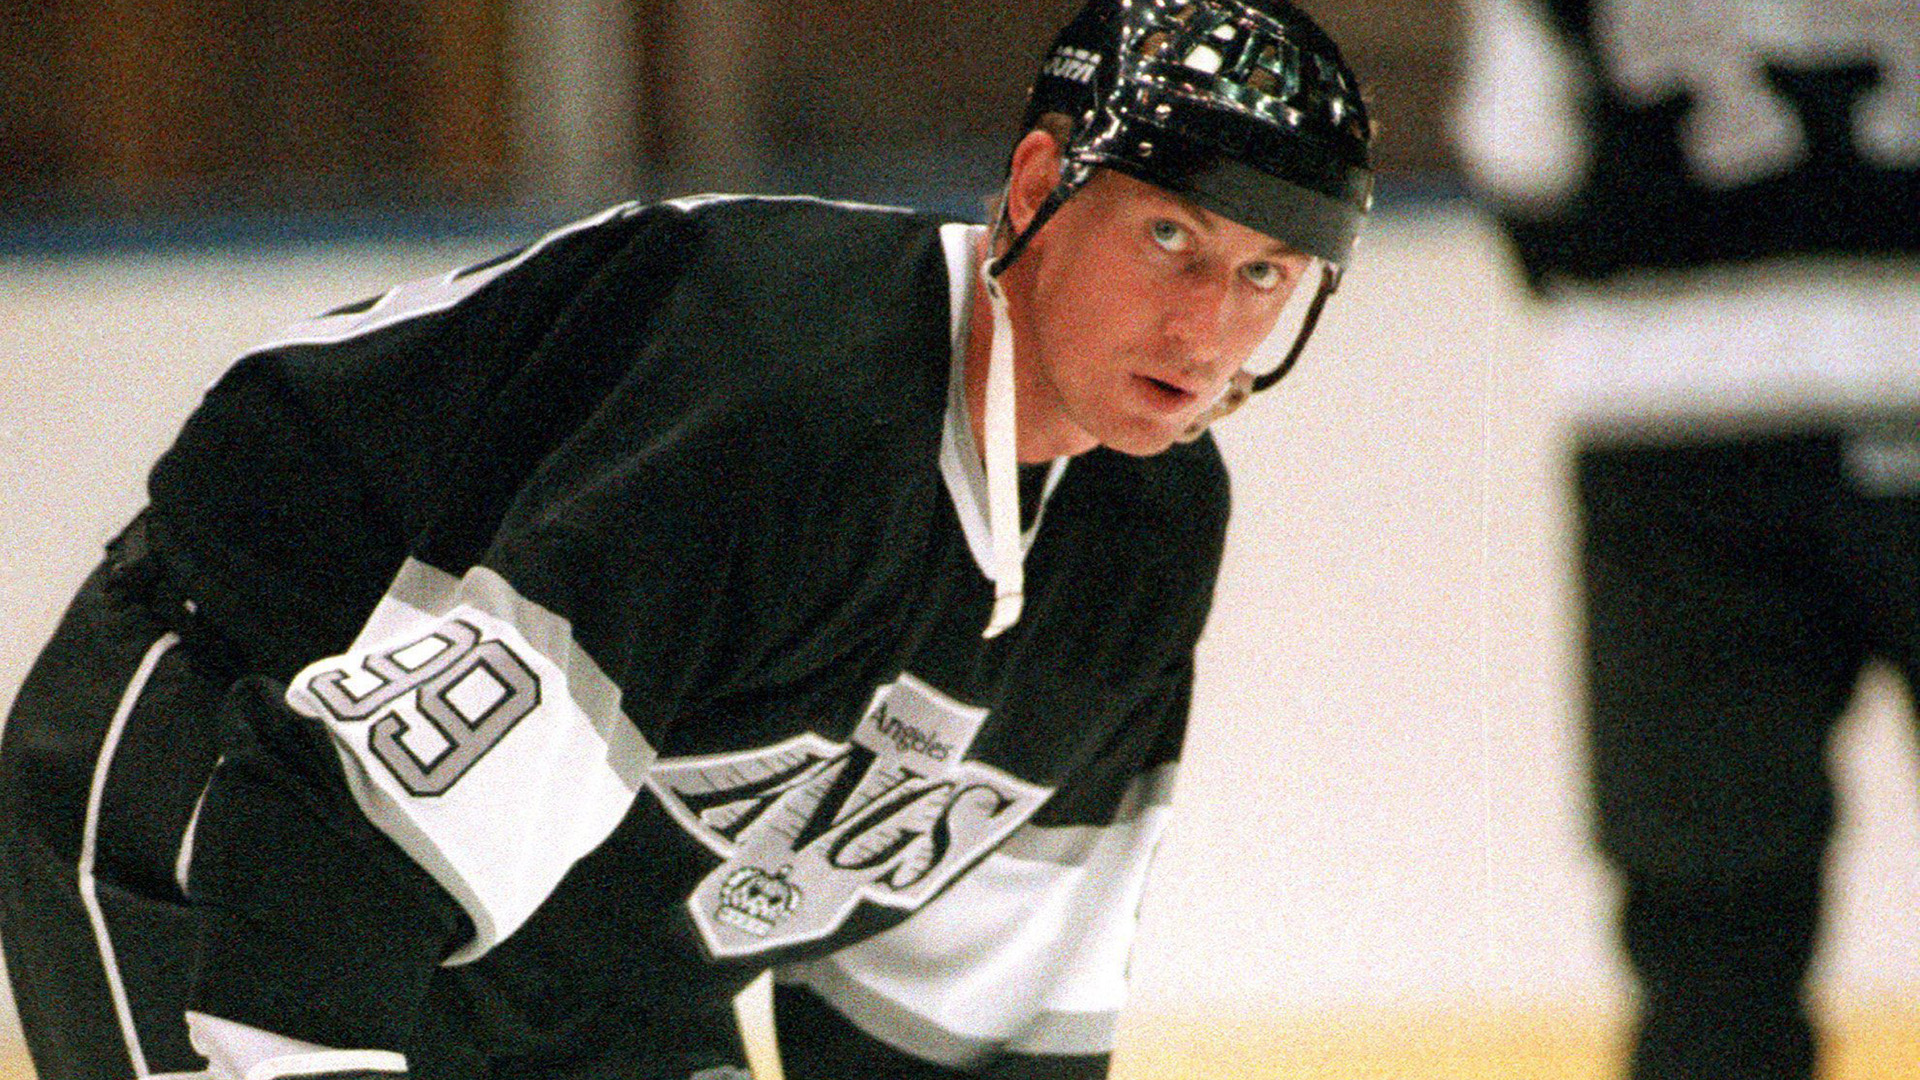 Wayne Gretzky: Maple Leafs 'could have won the Stanley Cup' in 1993